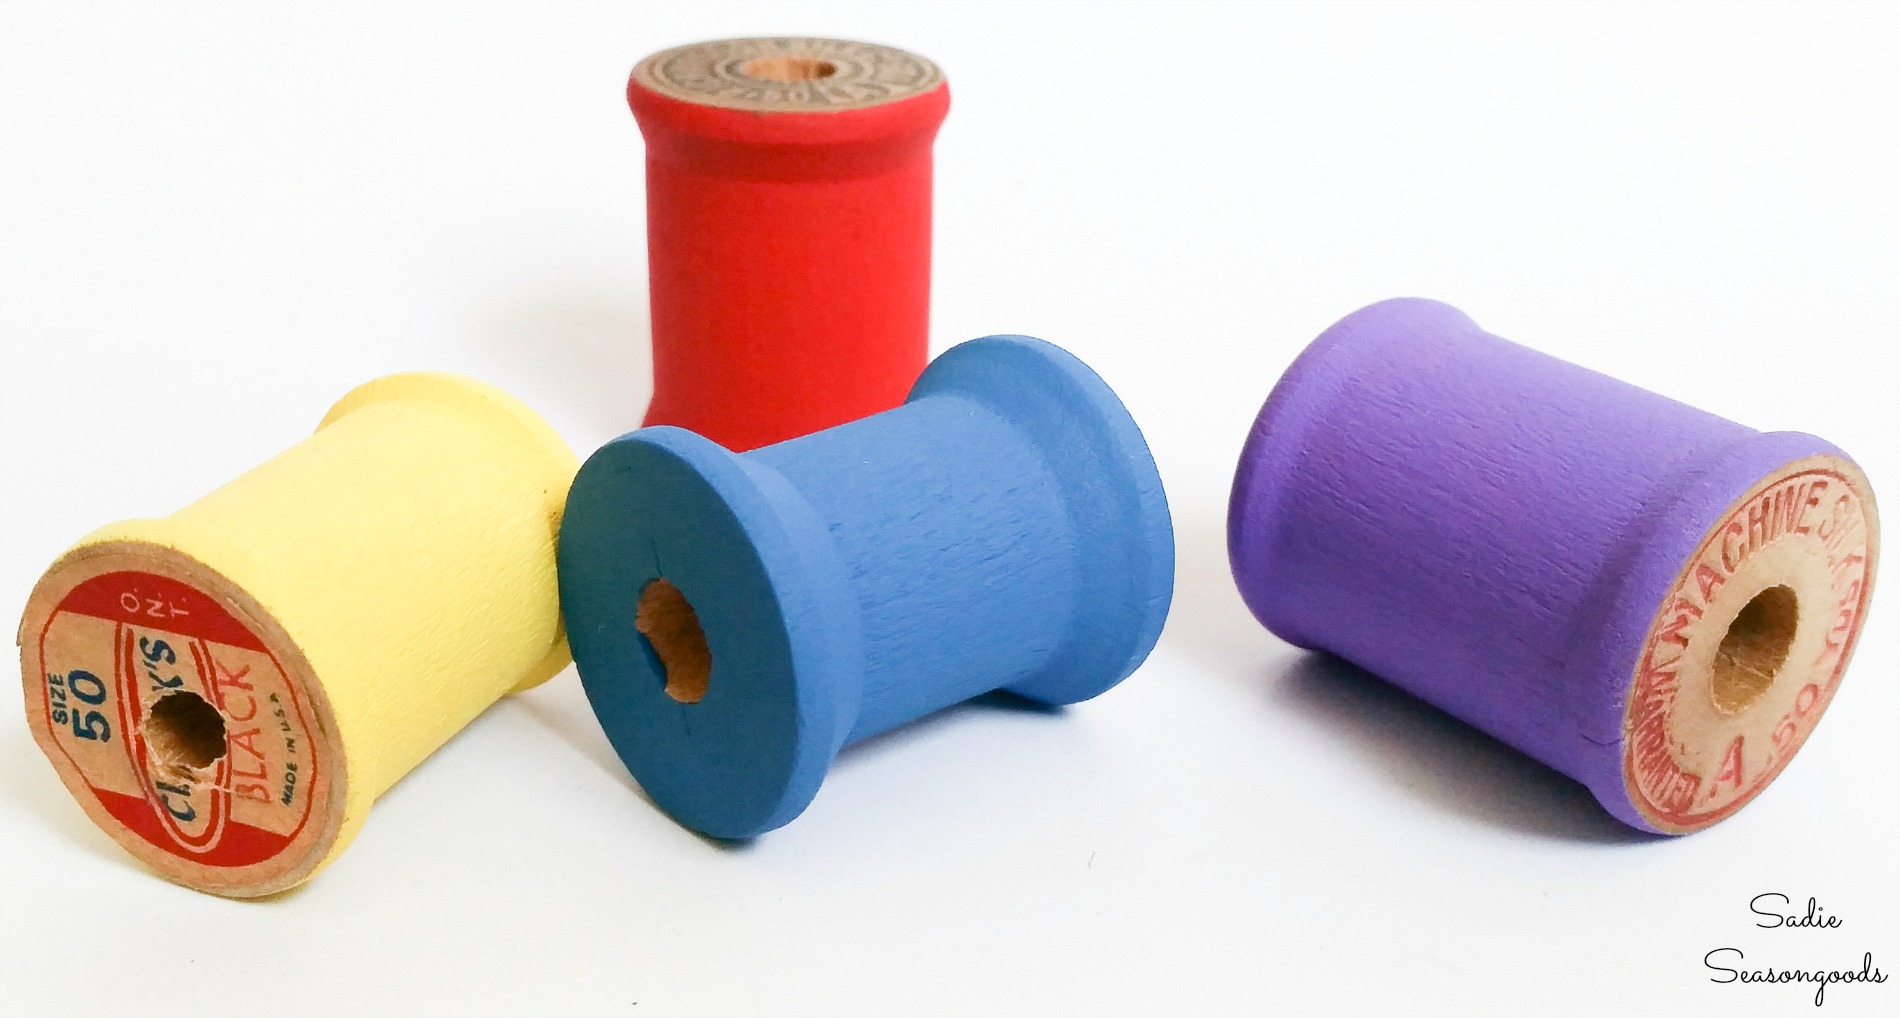 Painting the wooden thread spools